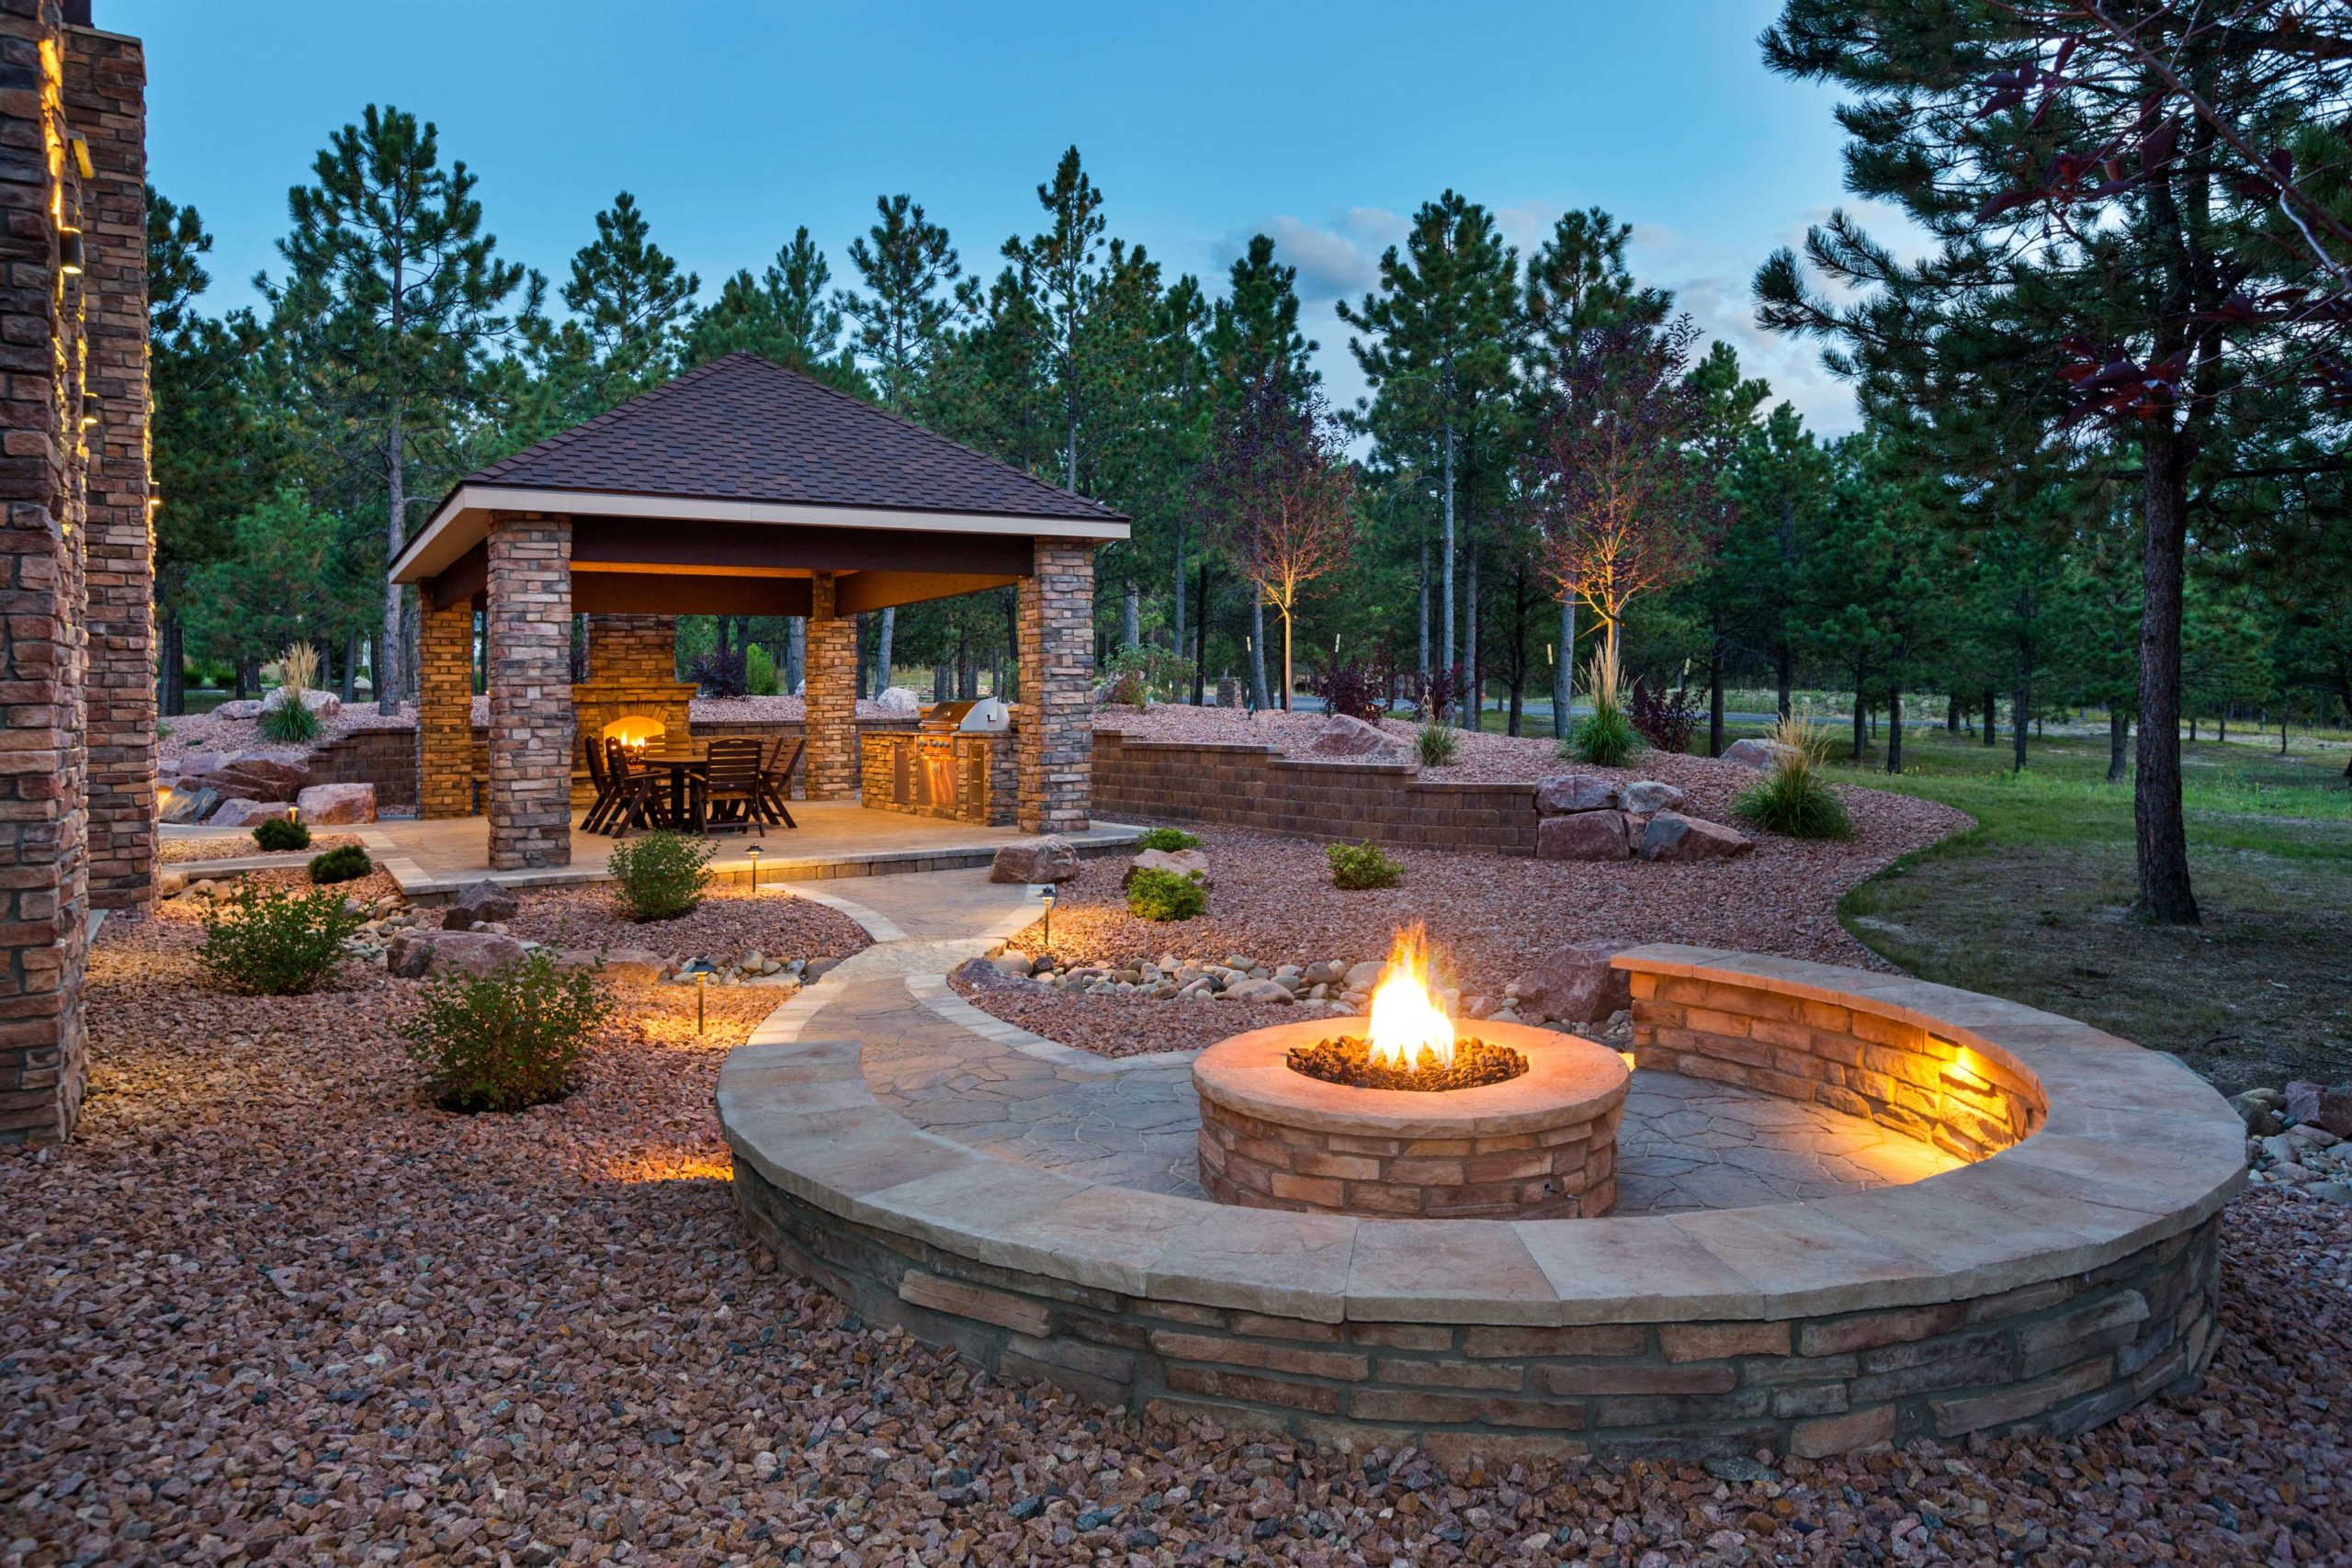 Outdoor stone landscape with wood fire